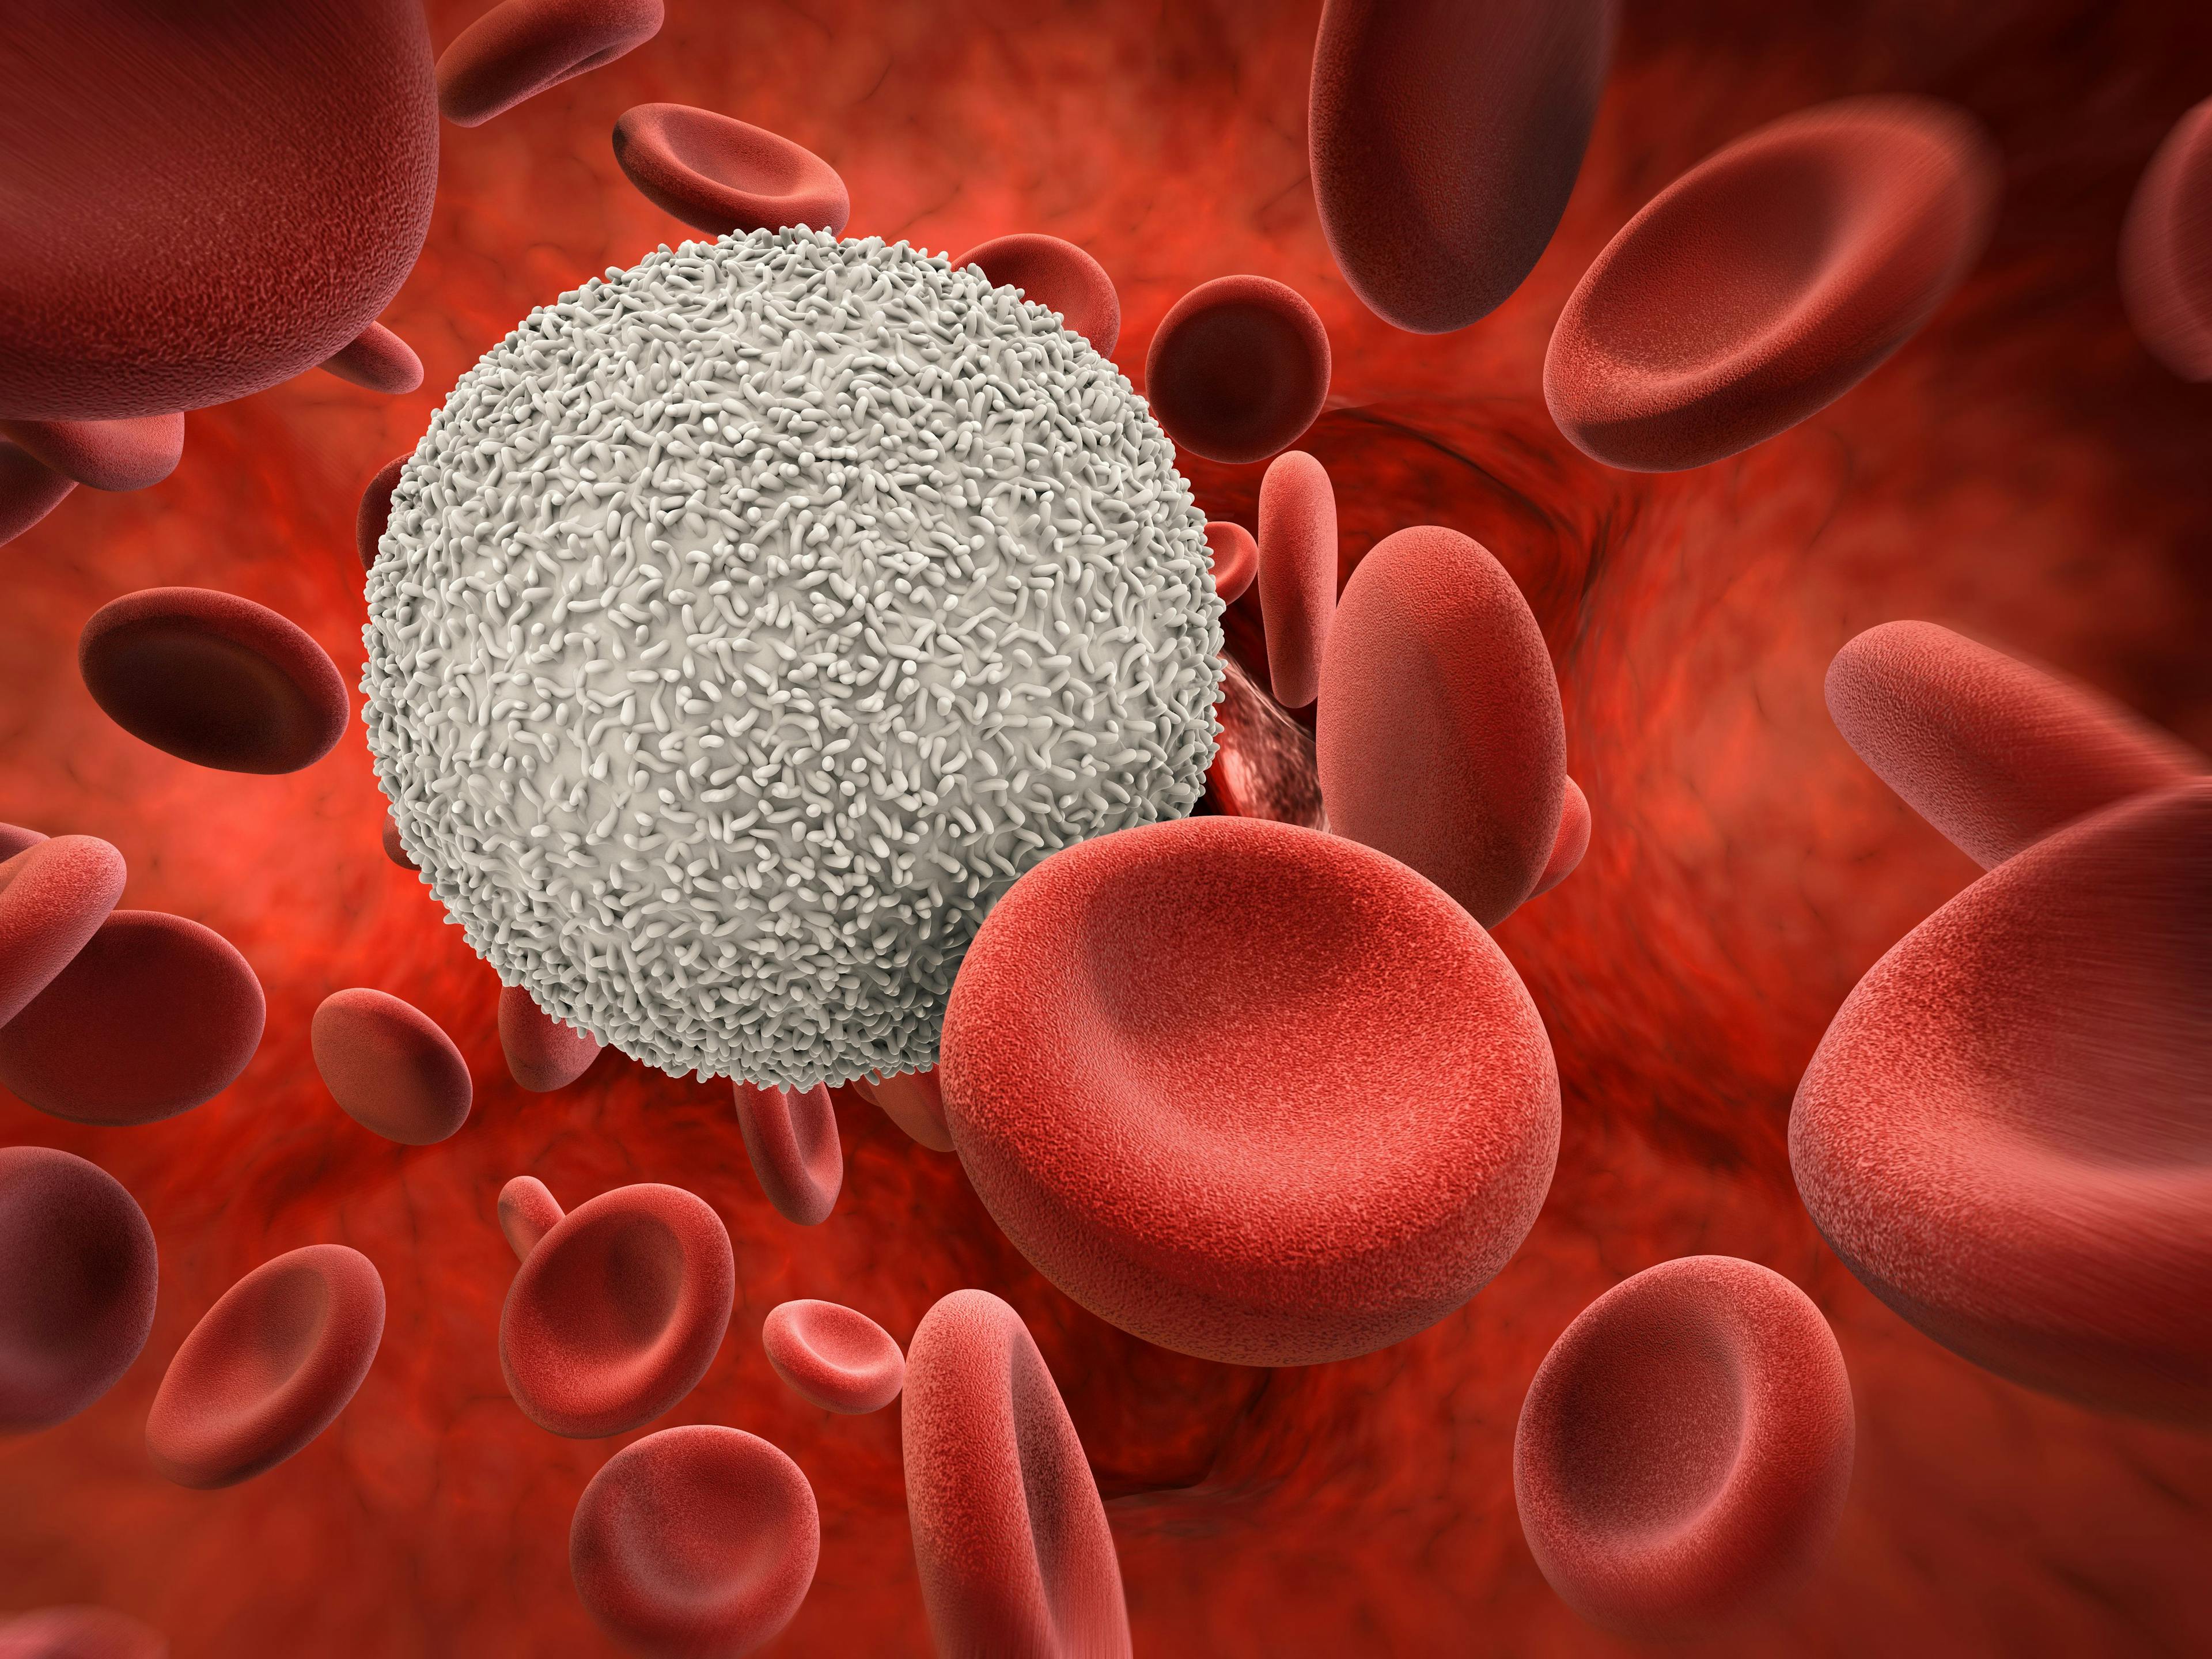 Epcoritamab monotherapy yielded positive results in patients with relapsed/refractory B-cell non-Hodgkin lymphoma and should be studied further, according to investigators.